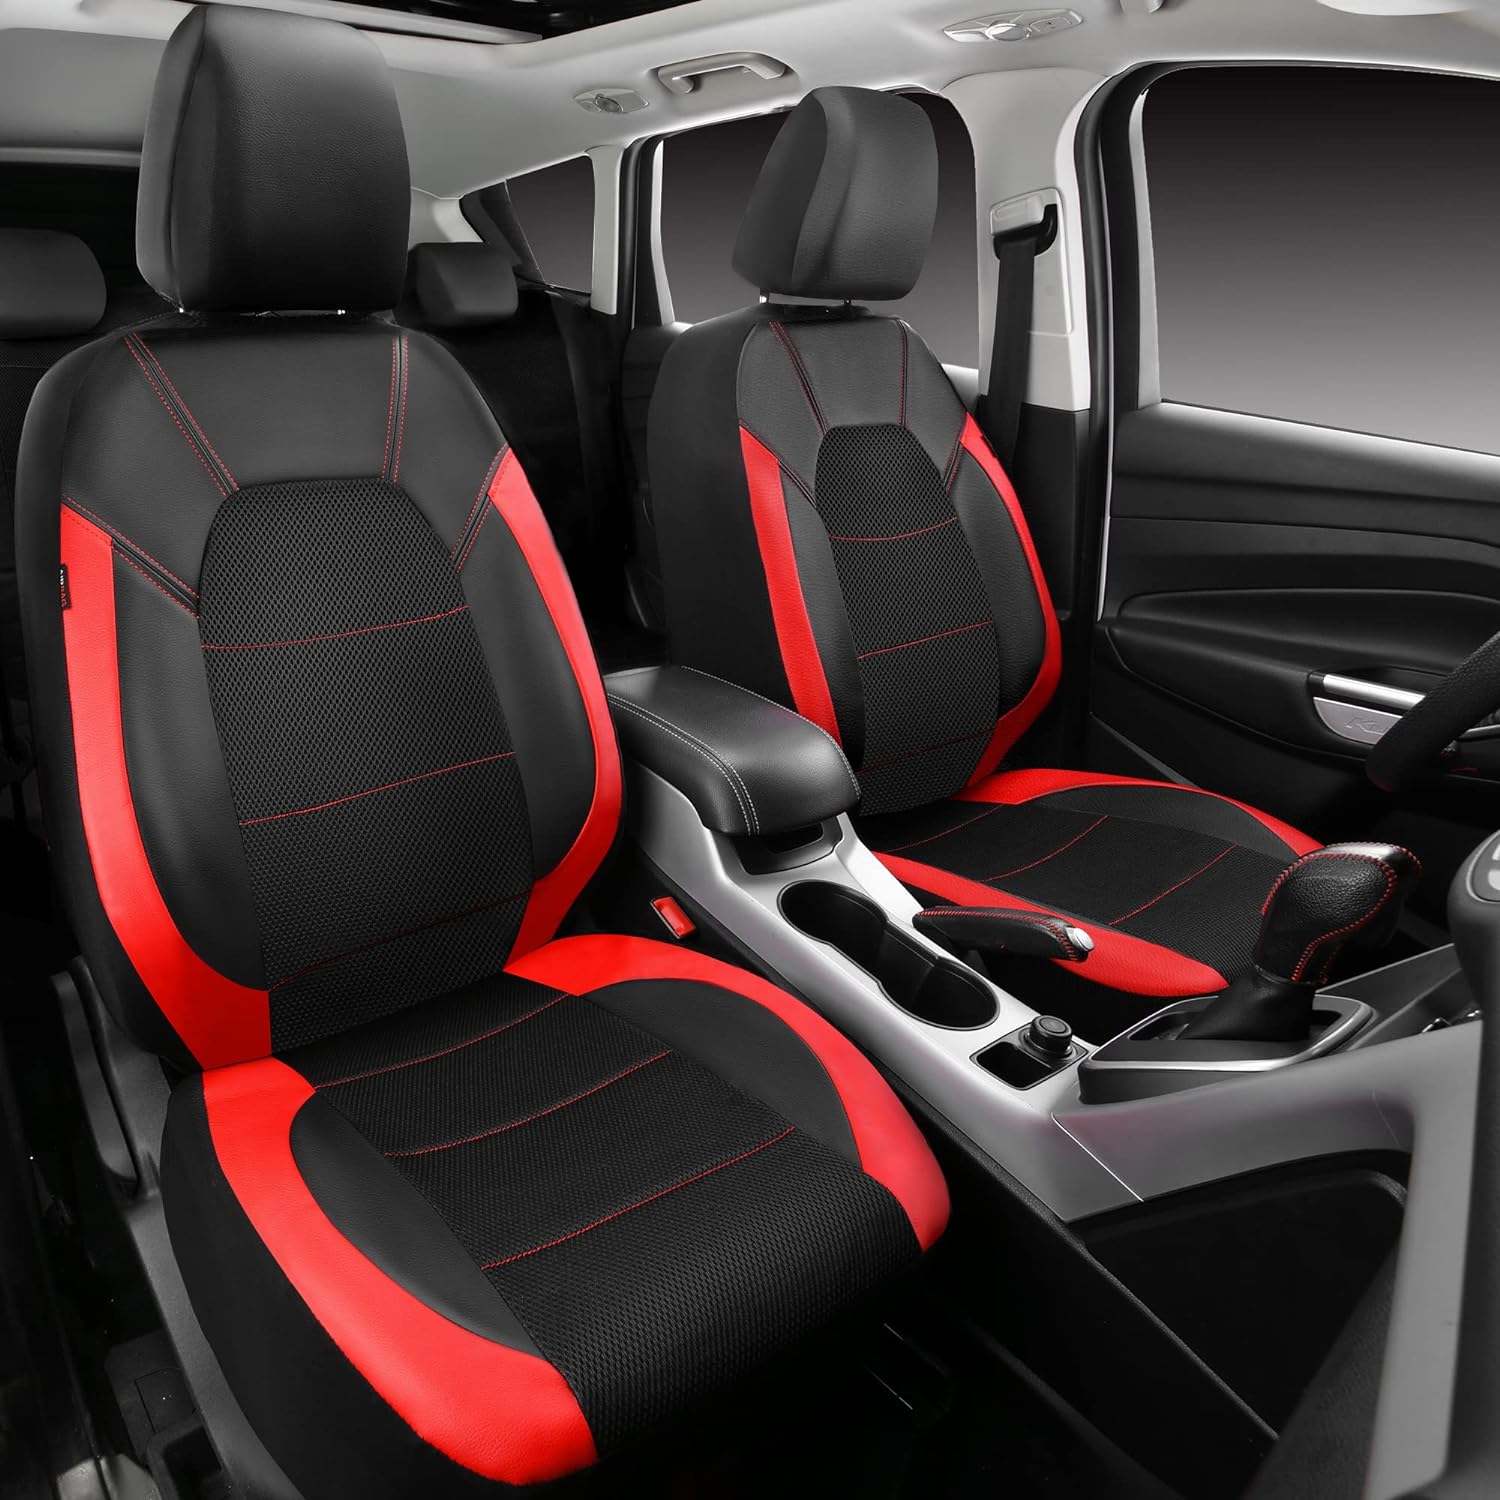 CAR PASS Universal Leather Two Front Seat Covers & Car Floor mats,Sport seat Covers fits Most Cars, SUVs, Trucks, and Vans Airbag Compatible (Black and Red)